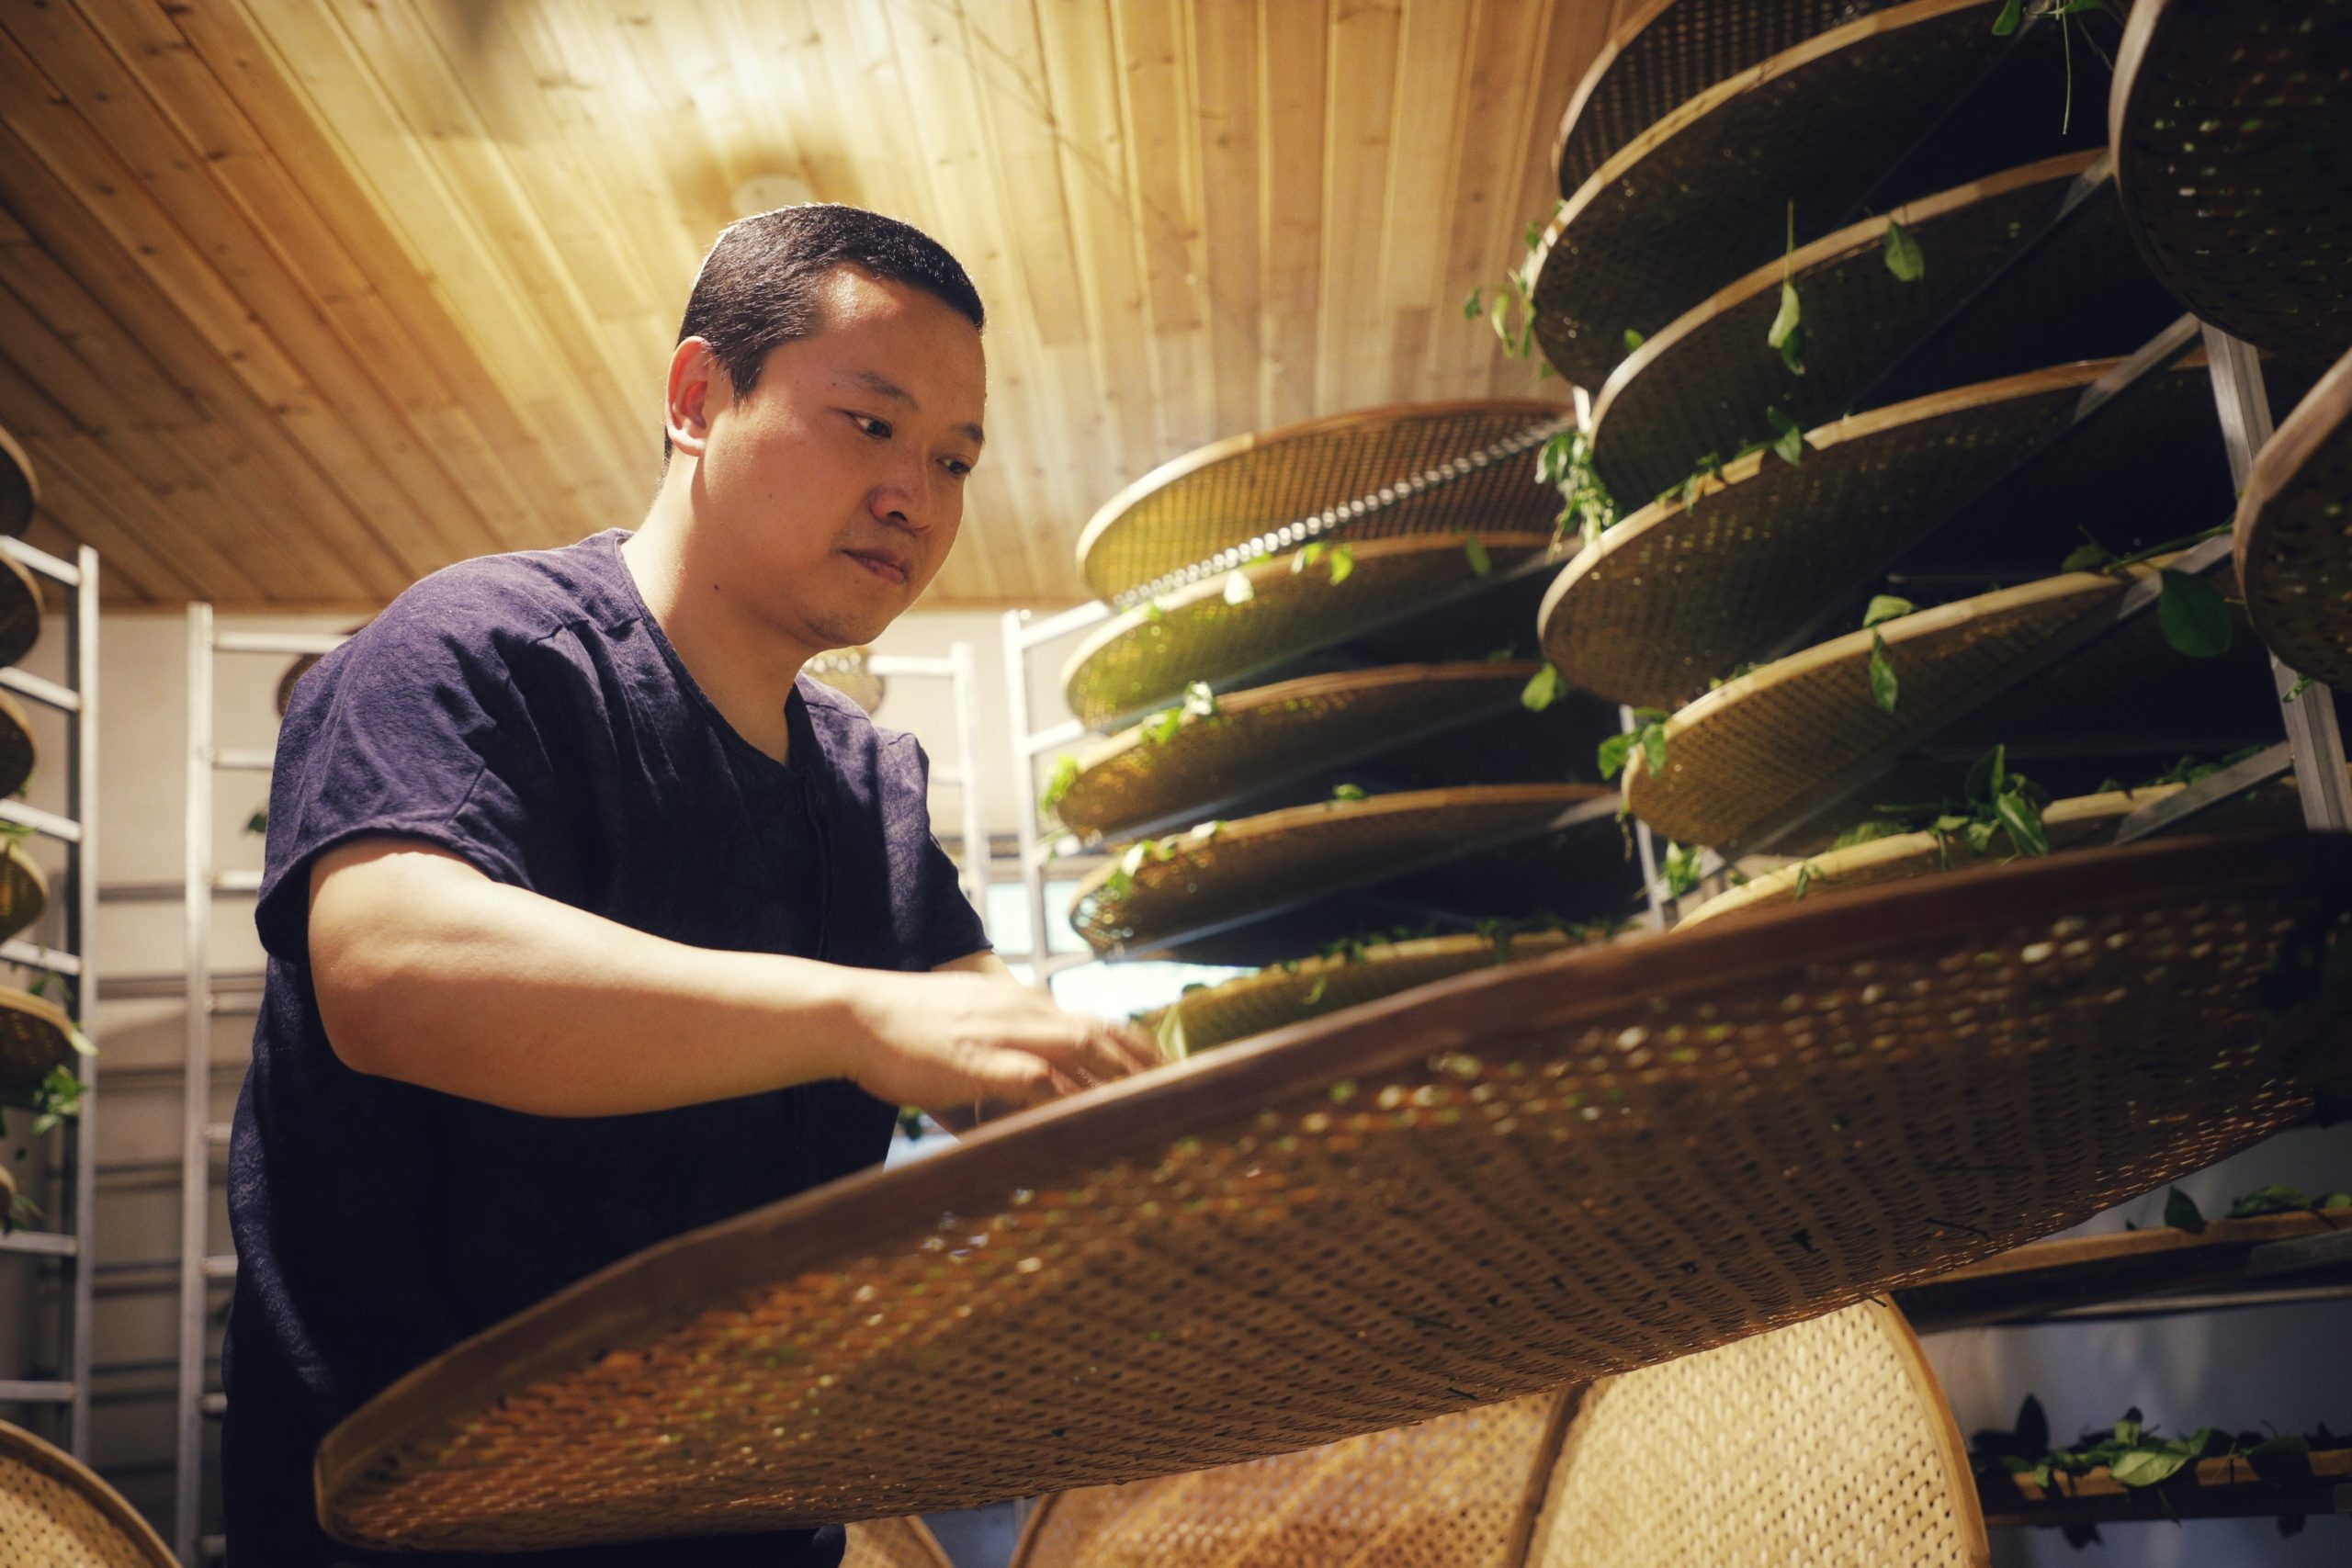 A man pulling a large round bamboo tray out from a rack of many others to check the tea leaves spread on it.